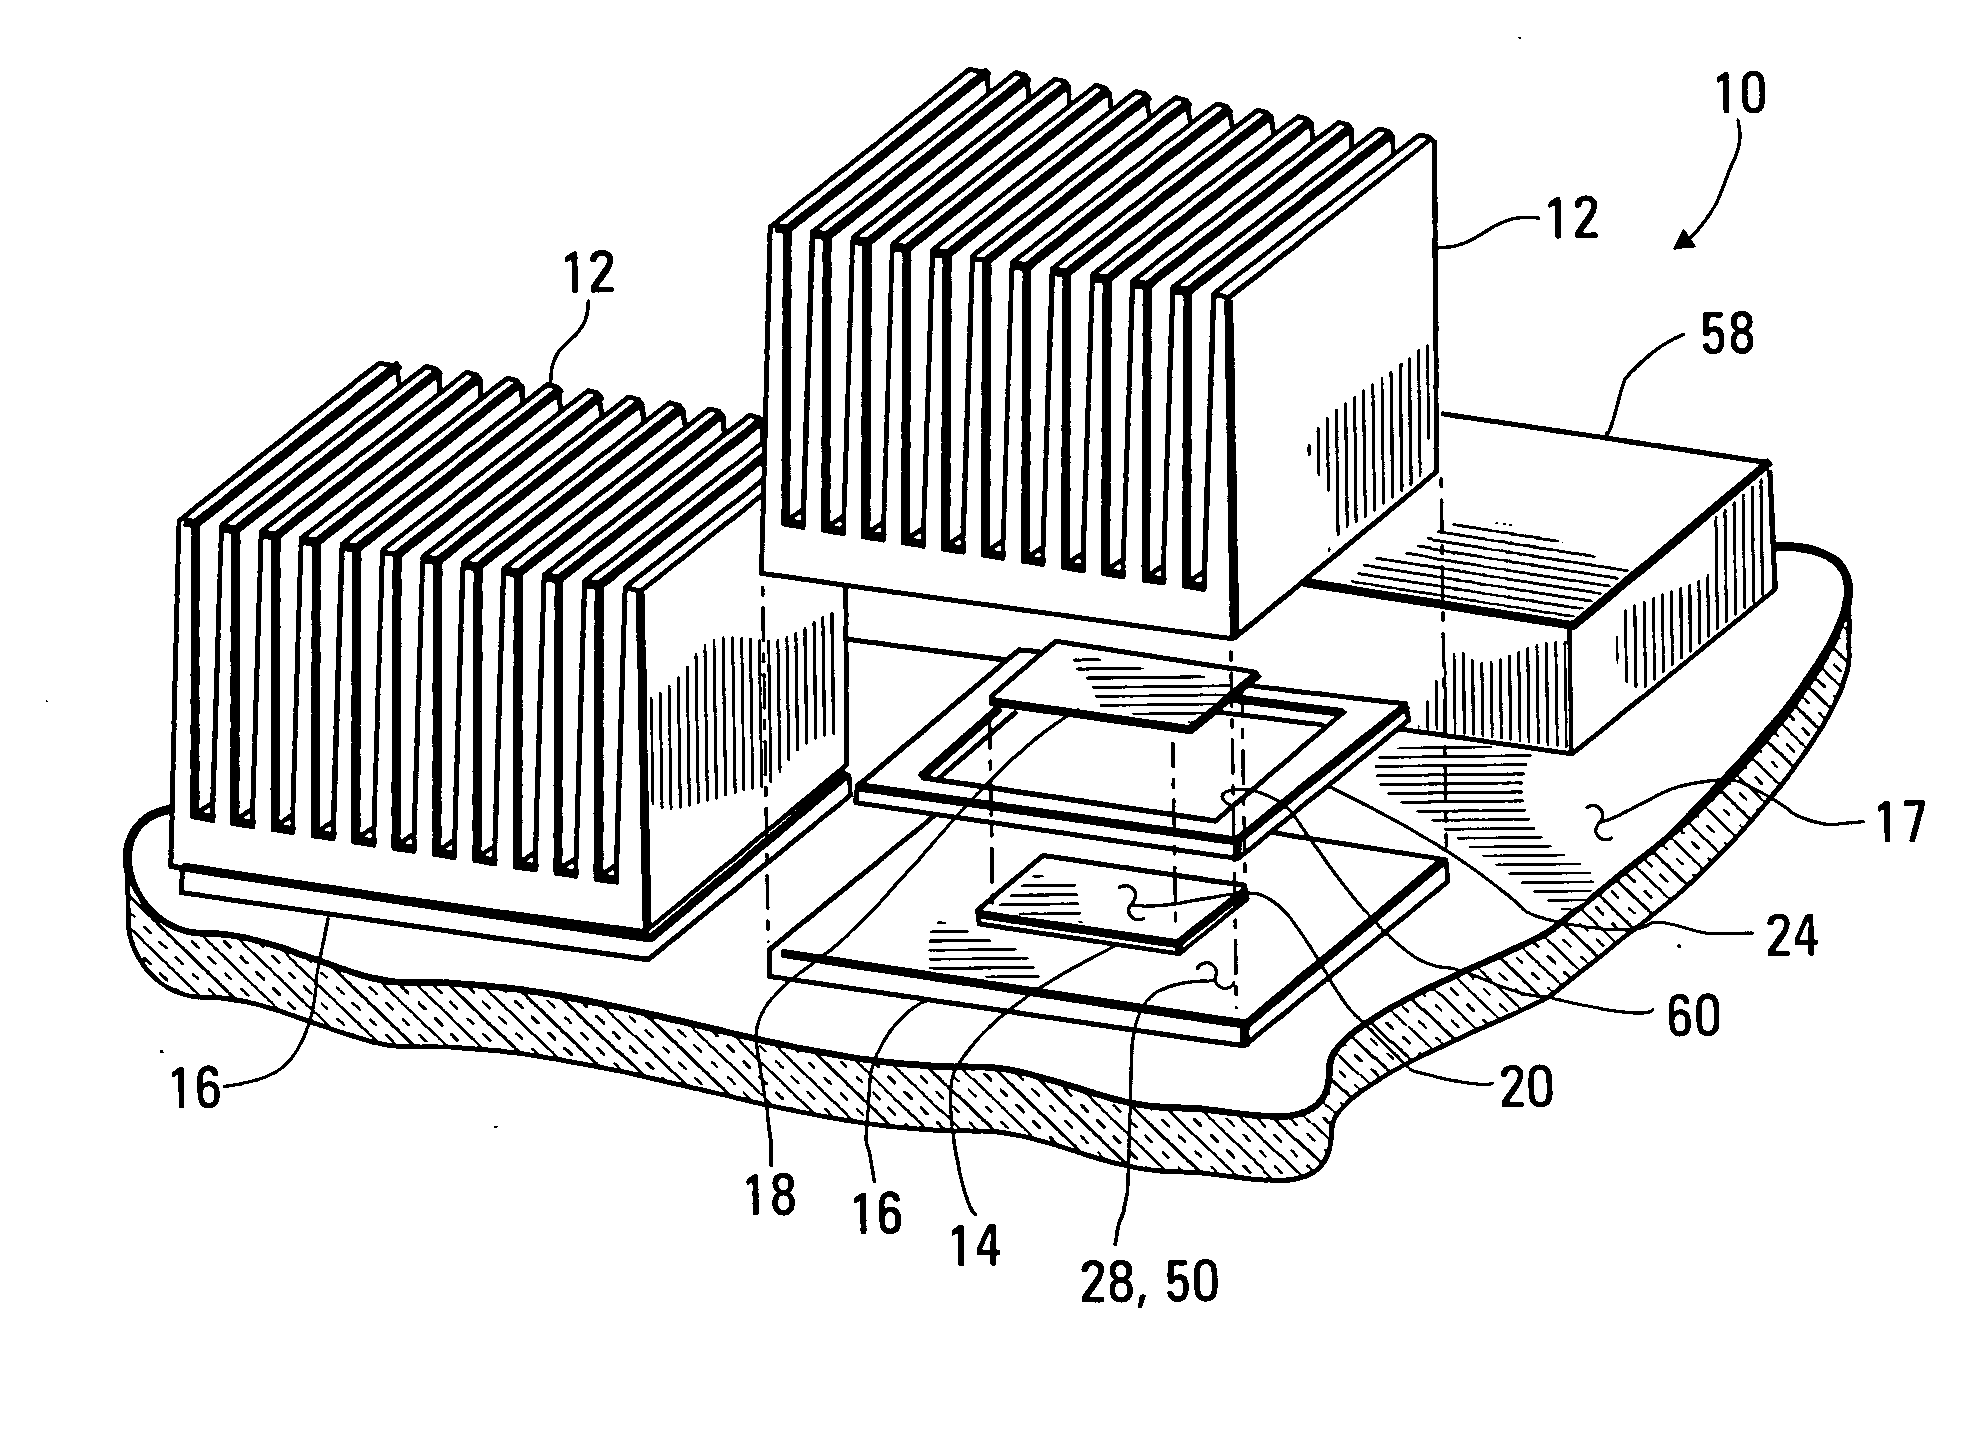 Apparatus and method for attaching a heat sink to an integrated circuit module